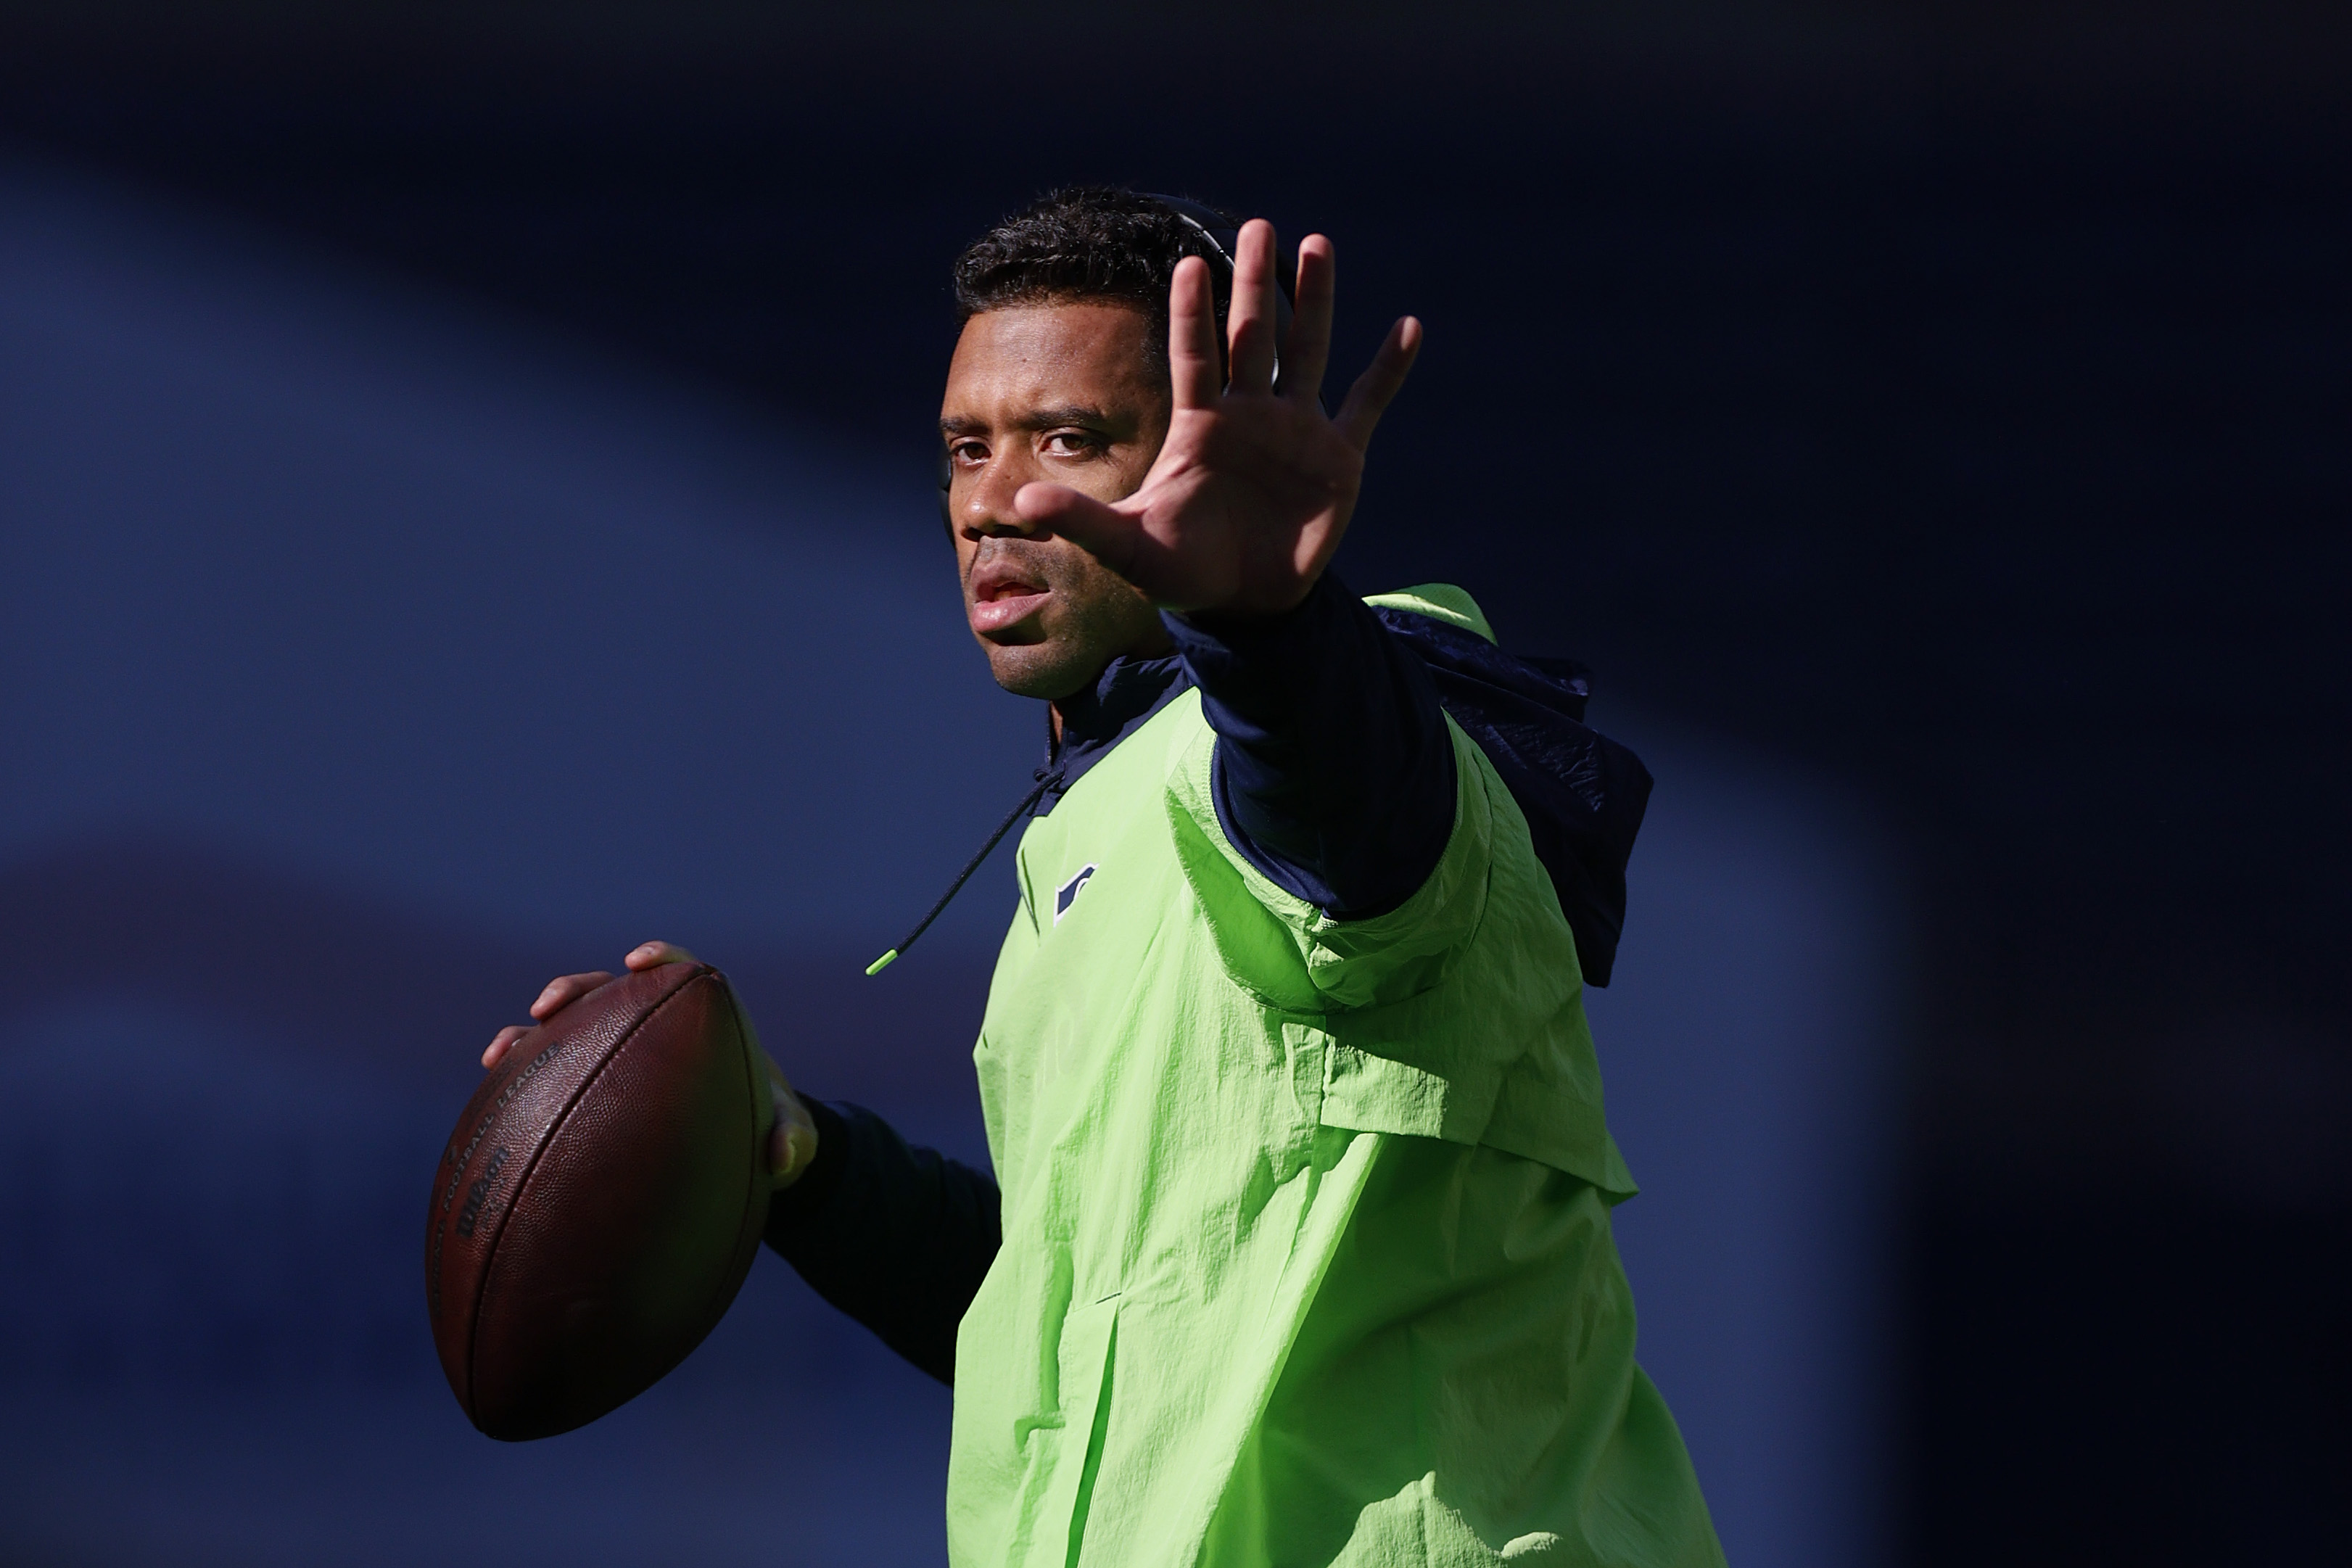 Russell Wilson of the Seattle Seahawks warms up before a game